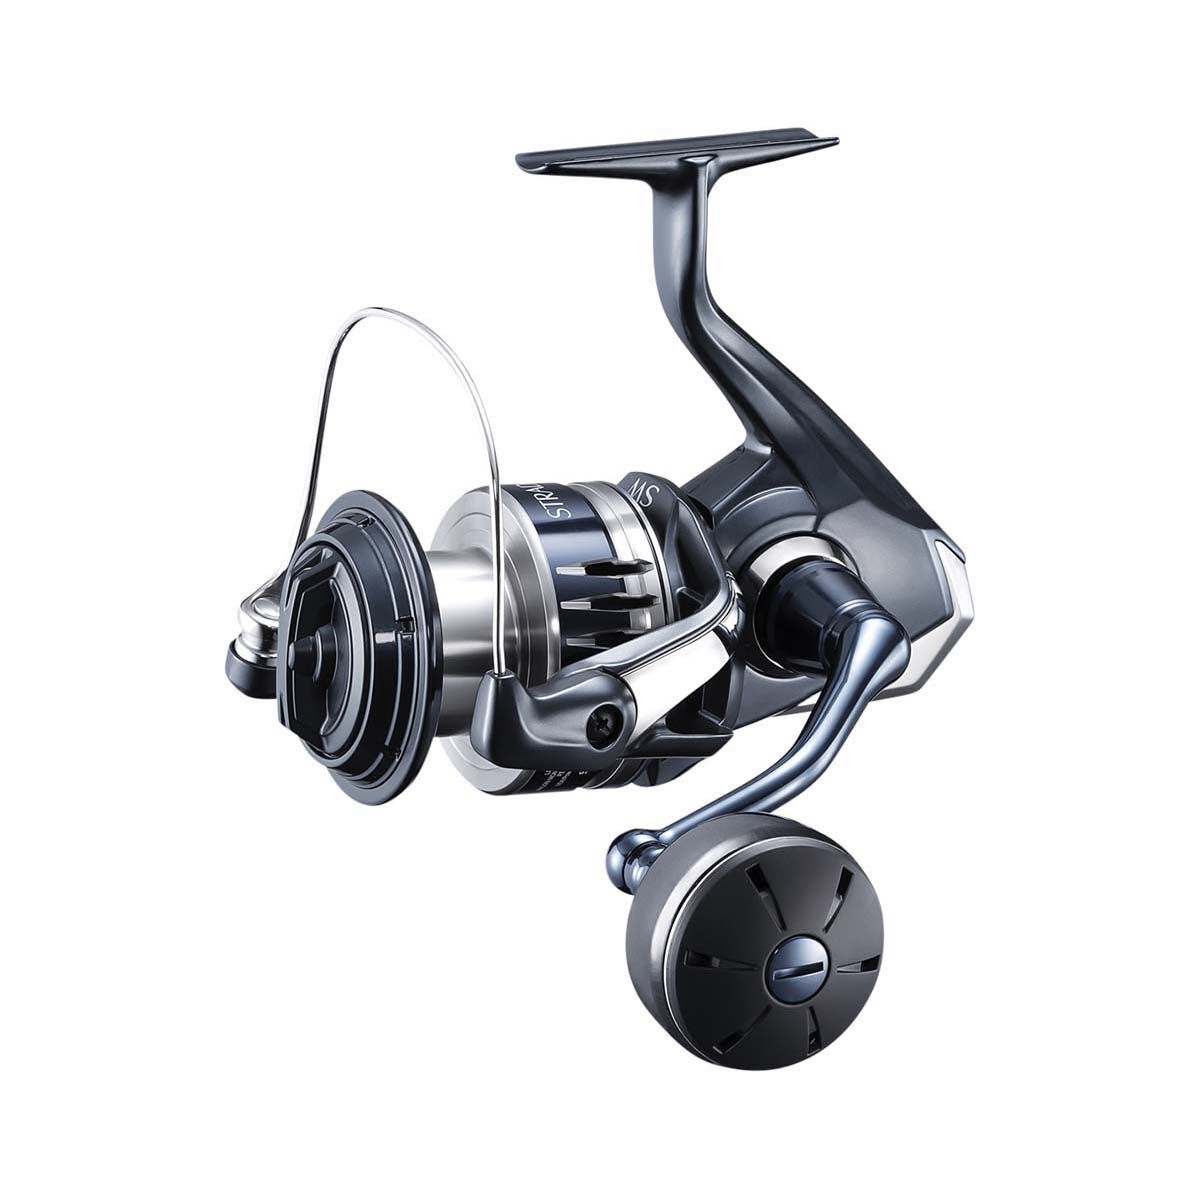 Shimano spinning reel, 2 SPINNING FISHING REELS SHAKESPEARE 40 & R2000 USED